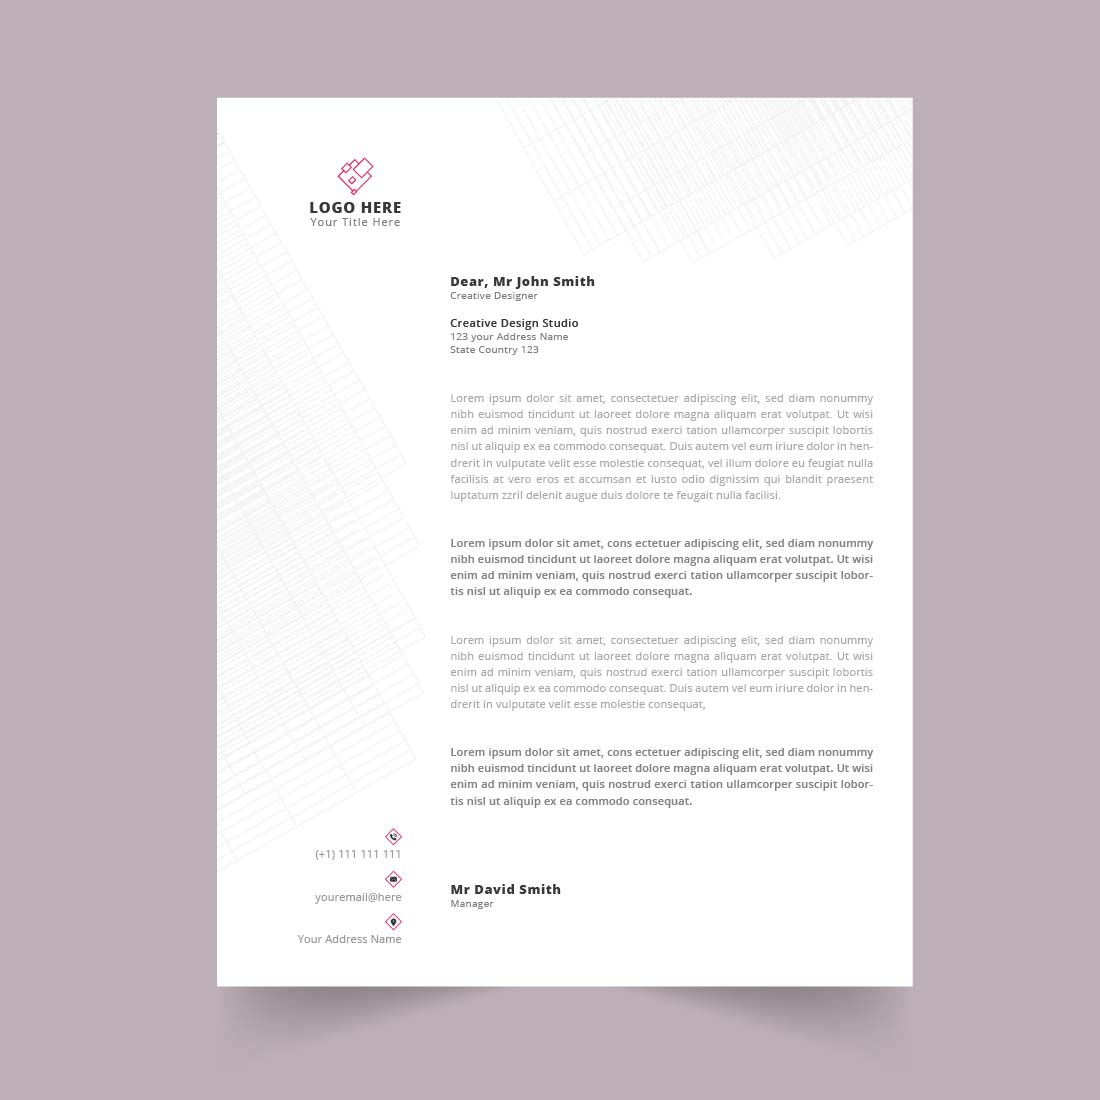 Letterhead for a company with a white background.